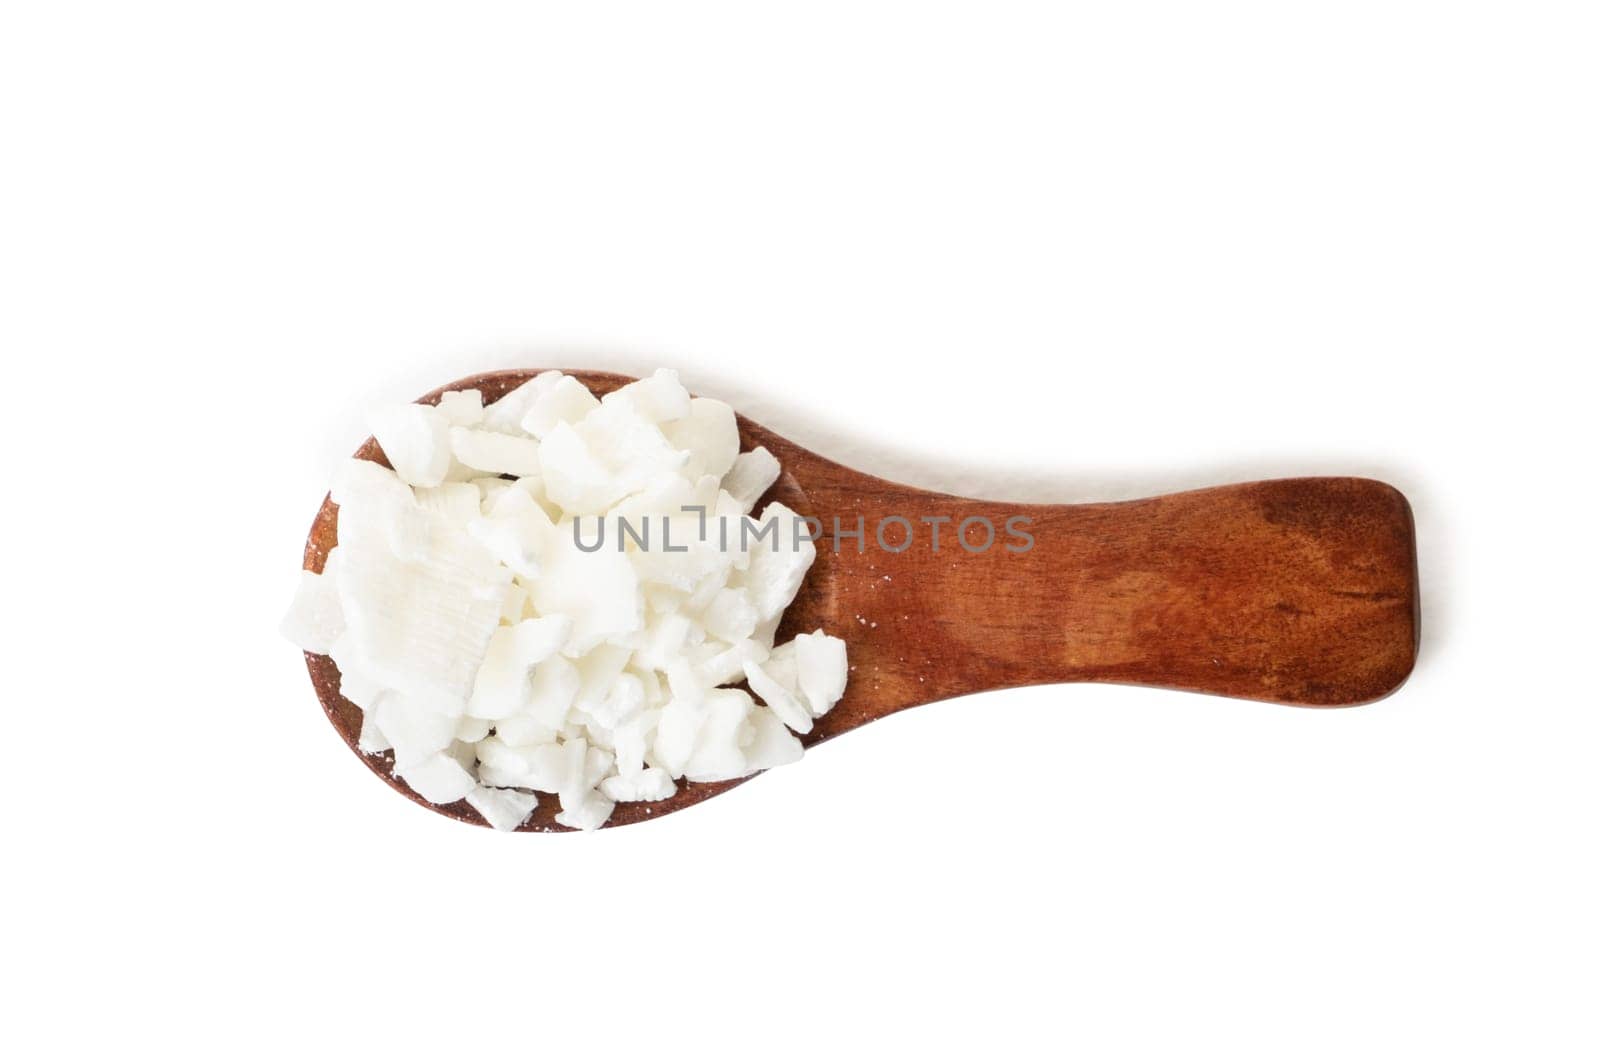 Organic white soy wax flakes for candles in small measure spoon isolated on white background with shadow